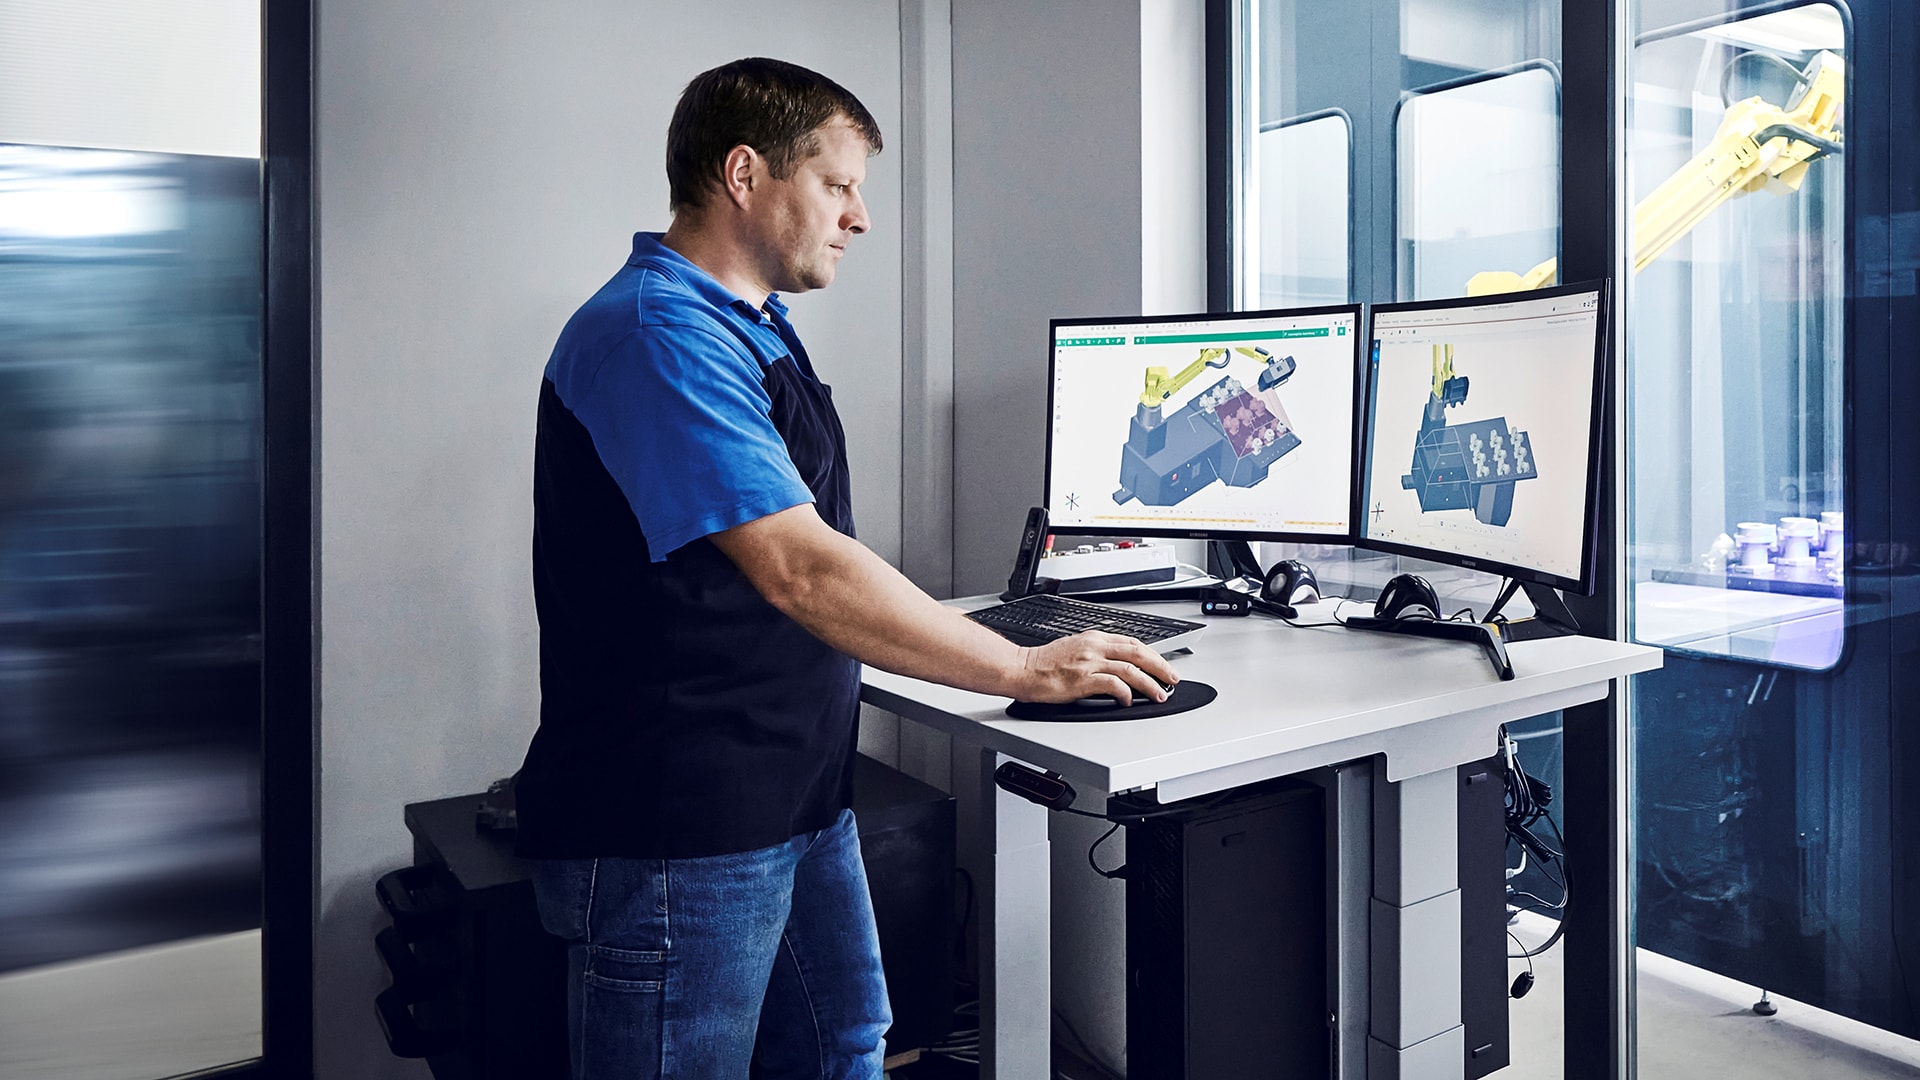 The foundry's metrologist imports the CAD data set together with the corresponding measurement plan into the virtual measuring room of the software GOM Inspect Pro. During each measurement, the system checks whether the results meet the quality criteria.